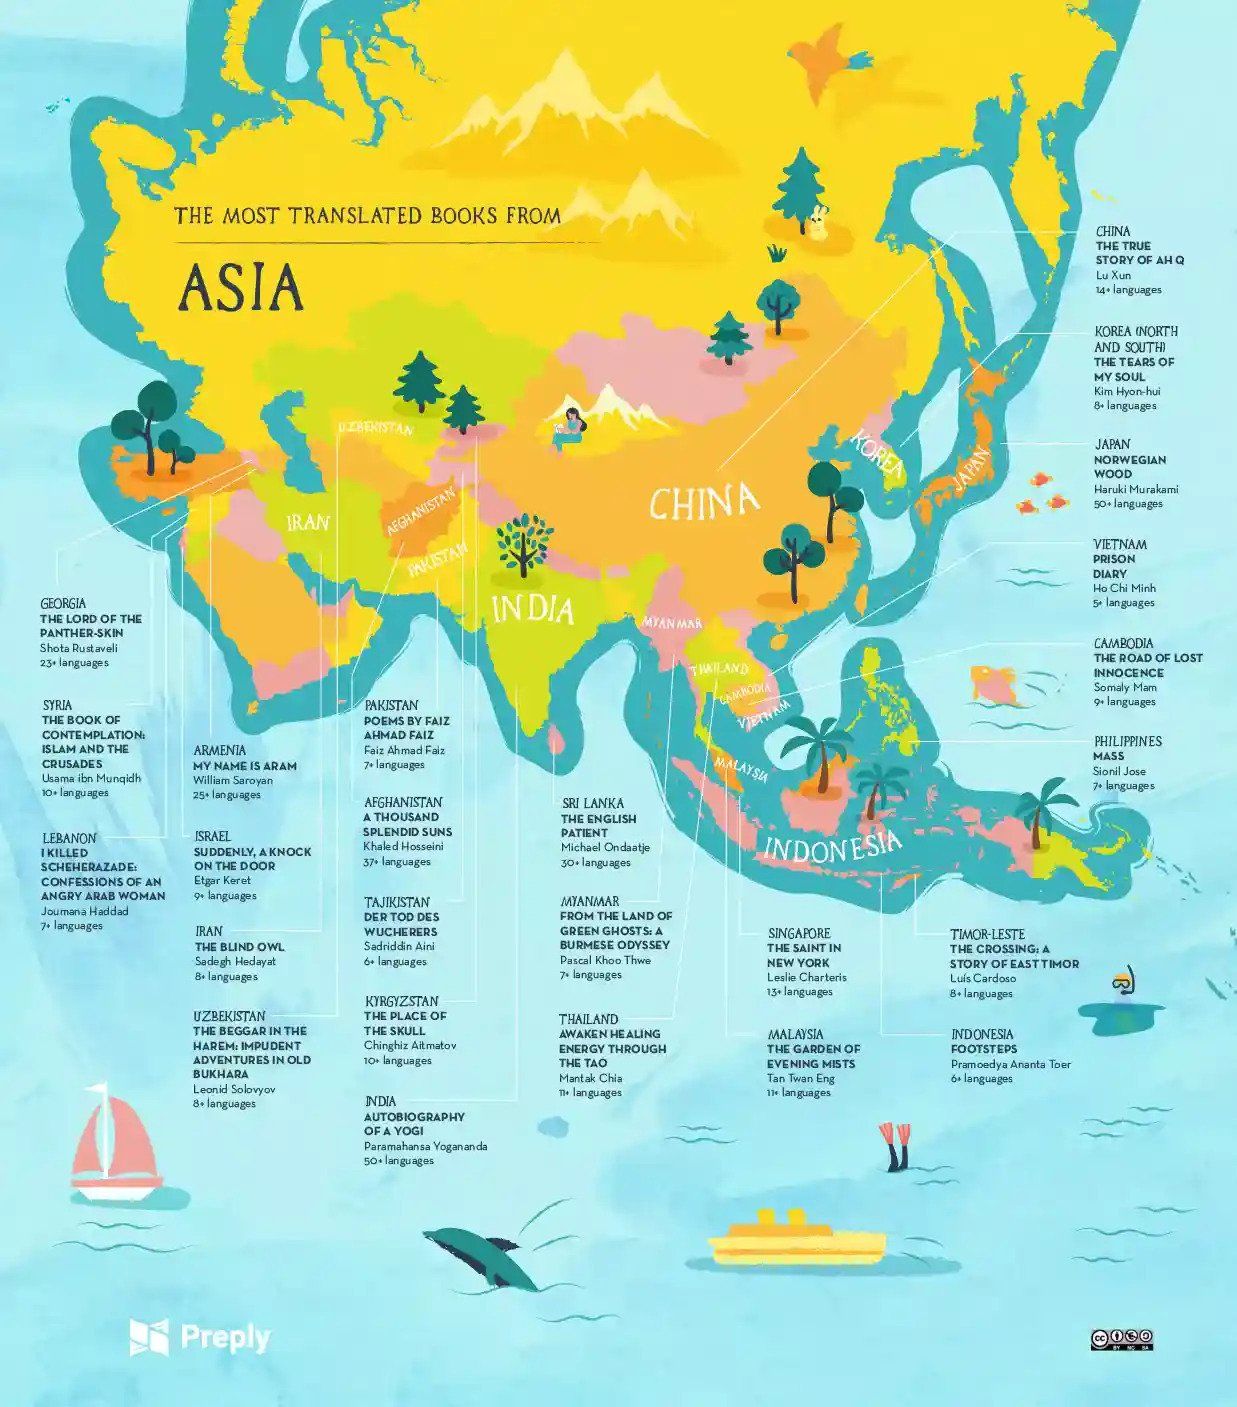 Most translated books from Asia map